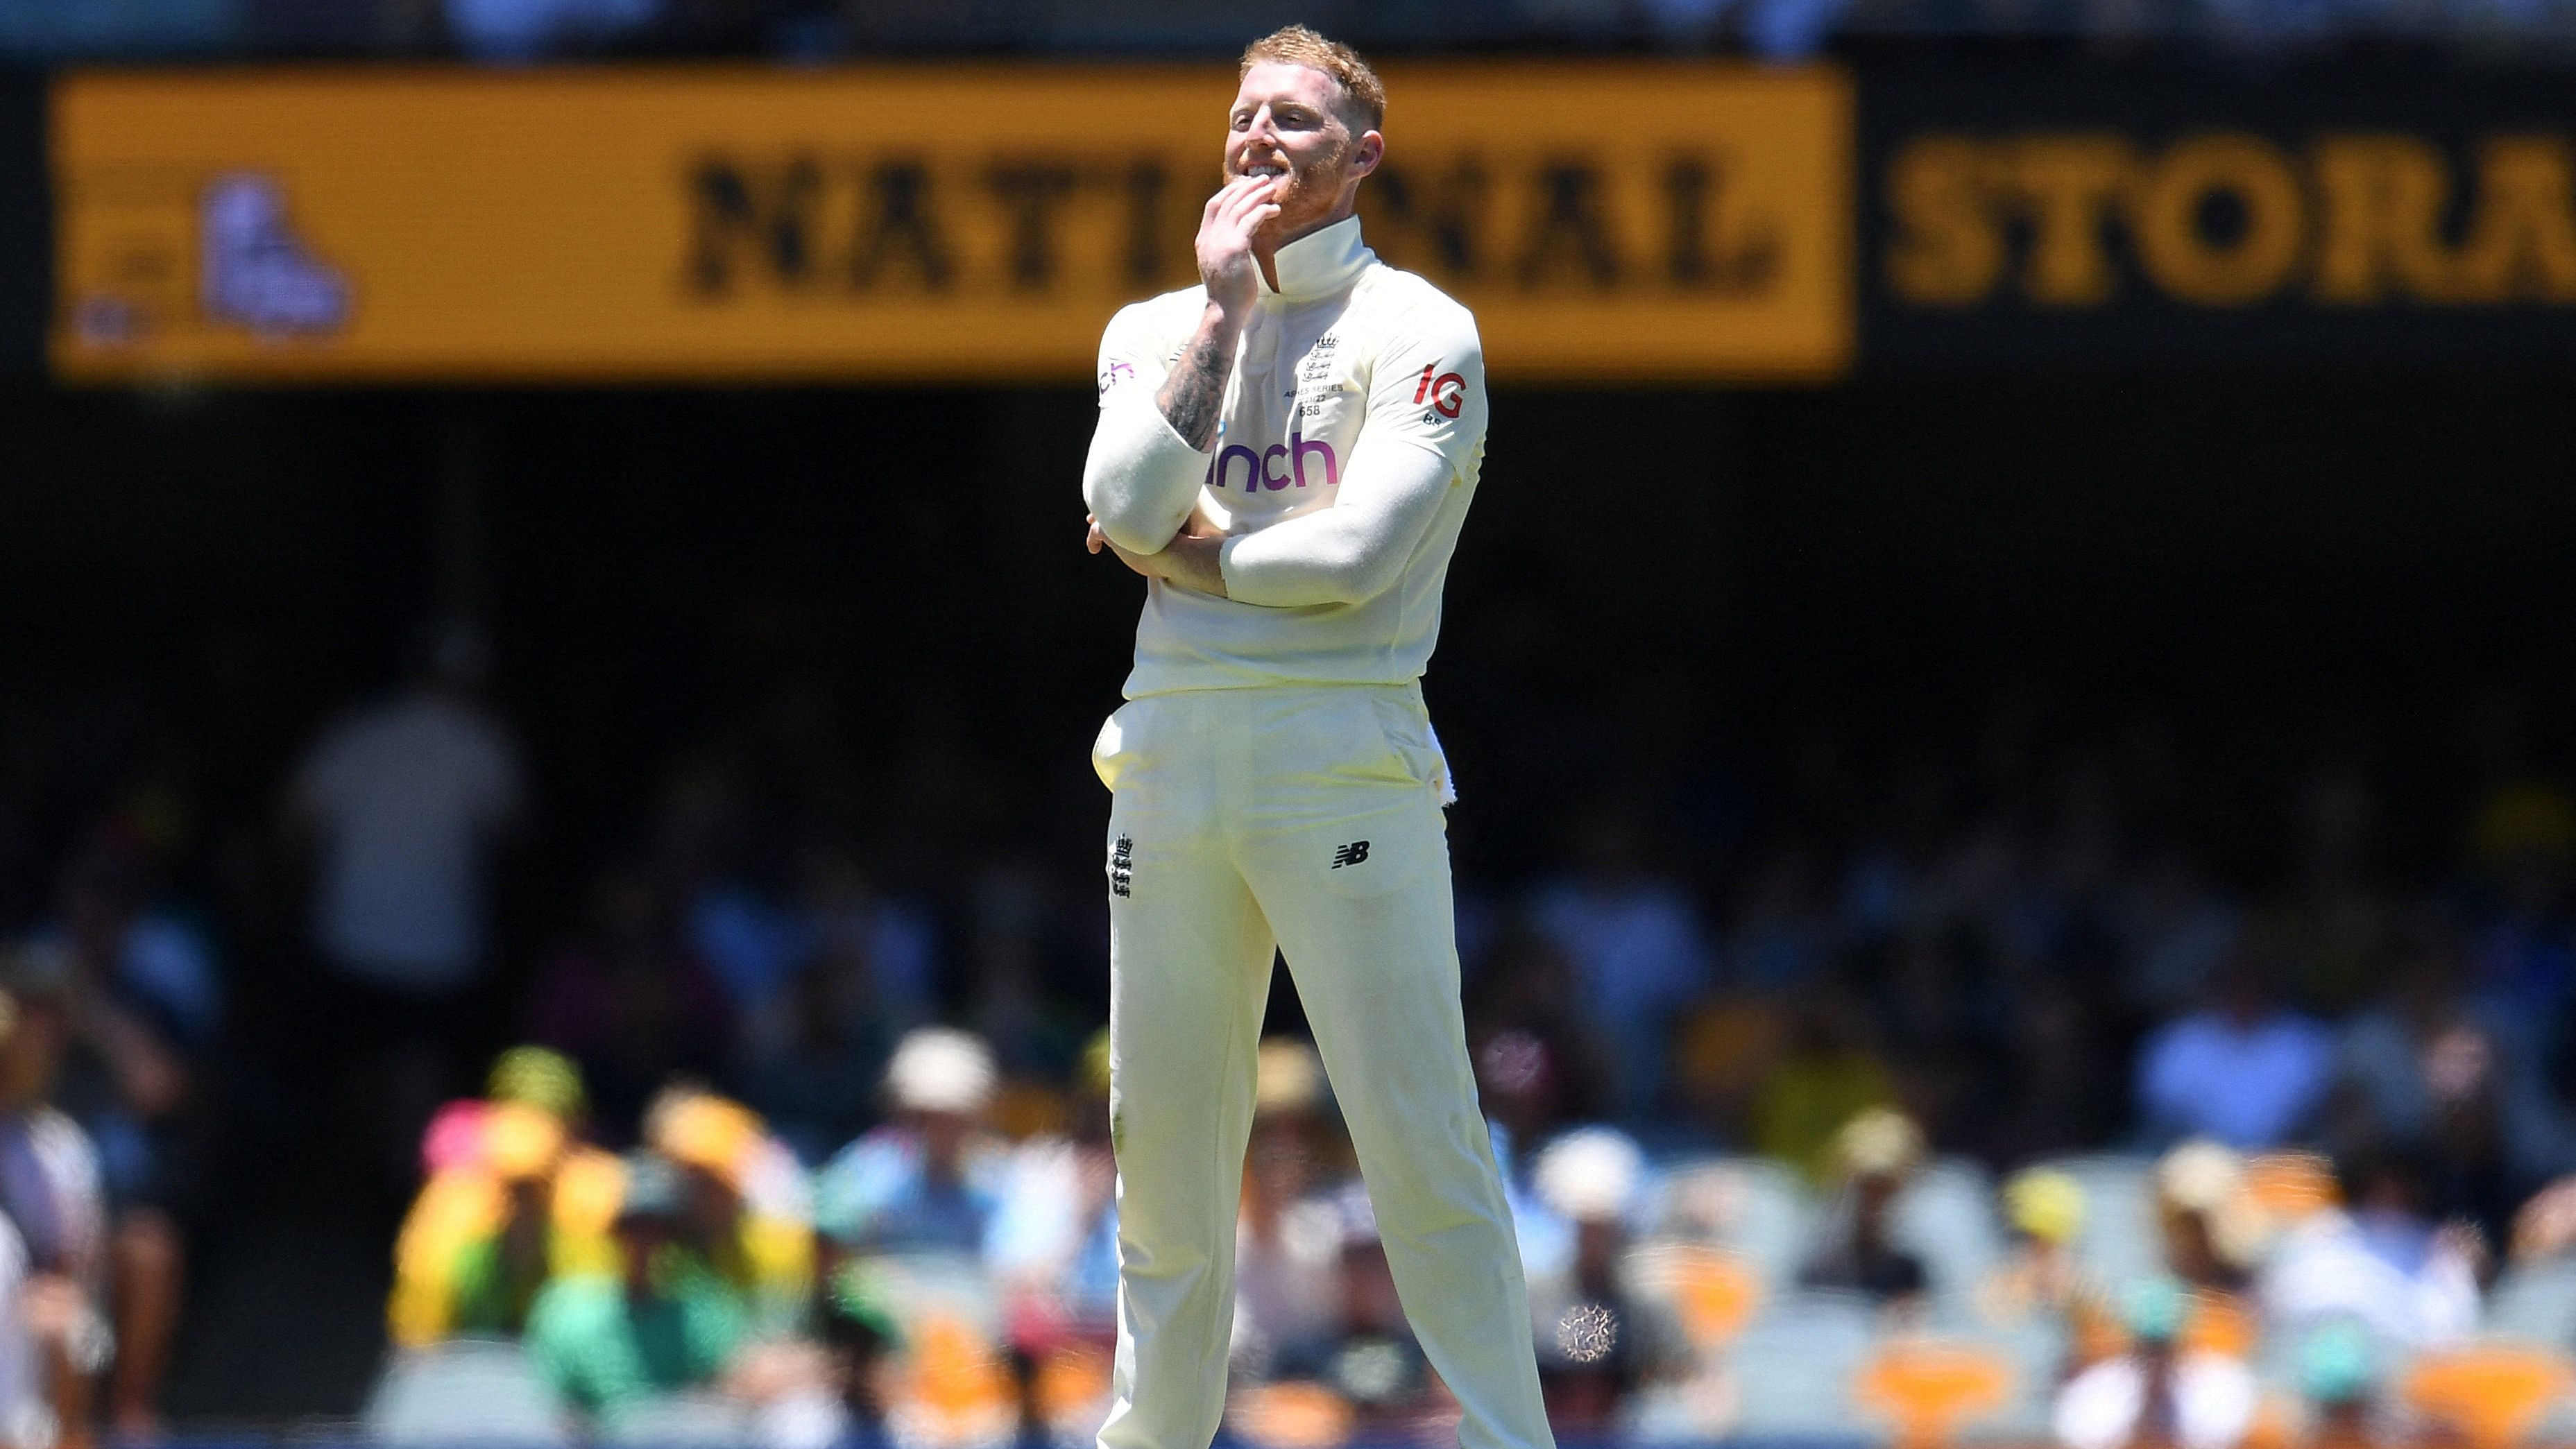 Stokes, playing his first competitive match since The Hundred in July, bowled Warner for 17 but the wicket was cancelled by a no-ball review that showed the all-rounder had over-stepped the mark. Credit: AFP Photo